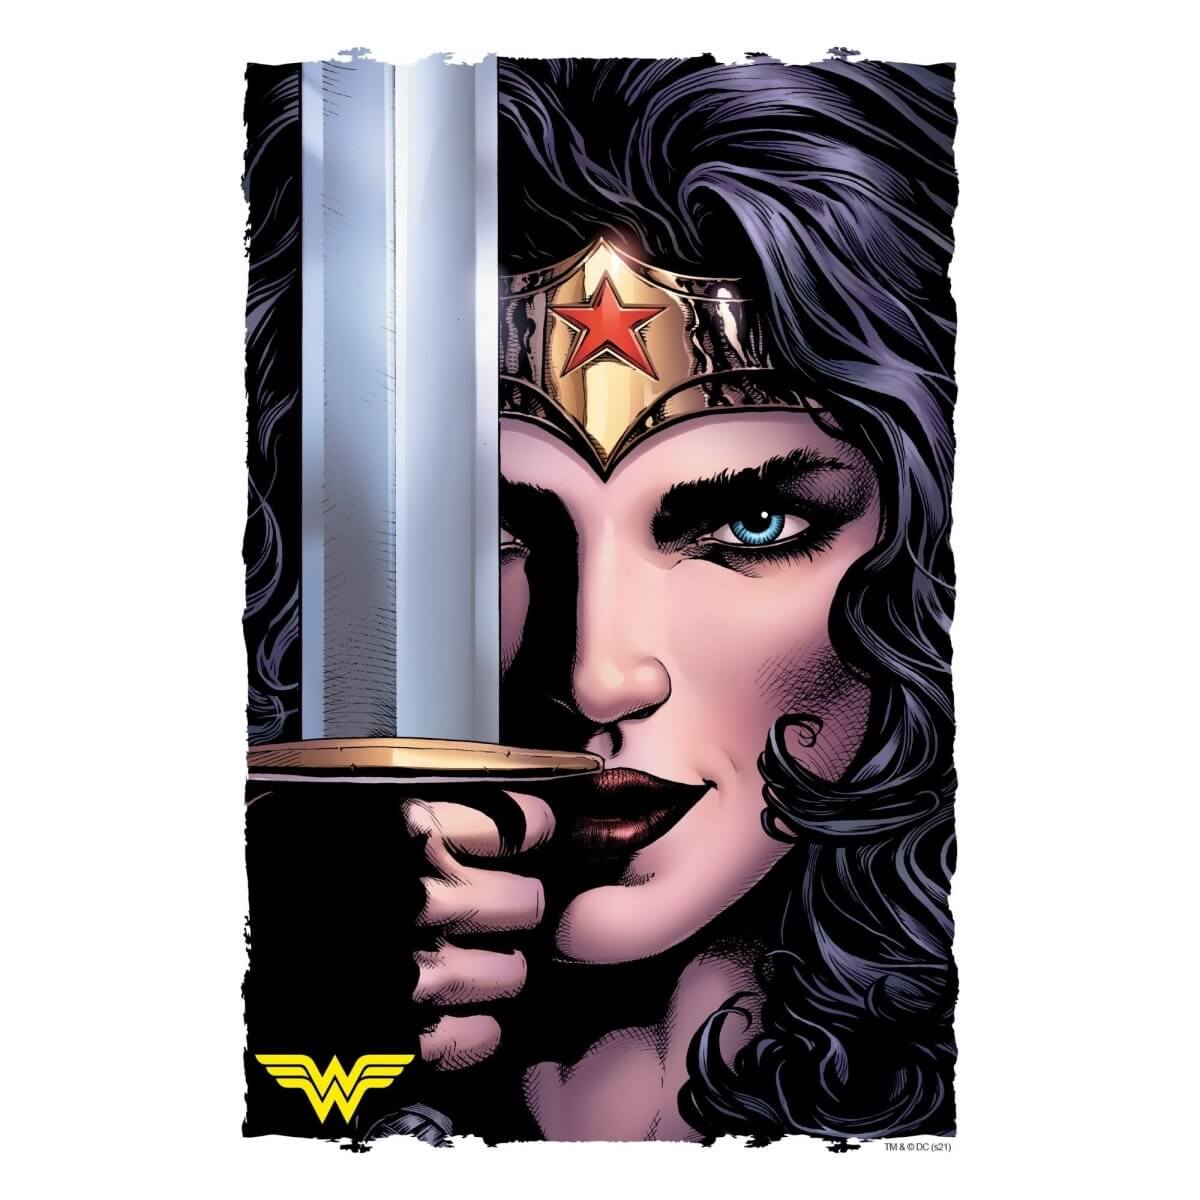 Kismet Decals Wonder Woman: Rebirth #1 Comic Cover Series Officially Licensed Wall Sticker - Easy DIY DC Comics Home, Kids or Adult Bedroom, Office, Living Room Decor Wall Art - Kismet Decals